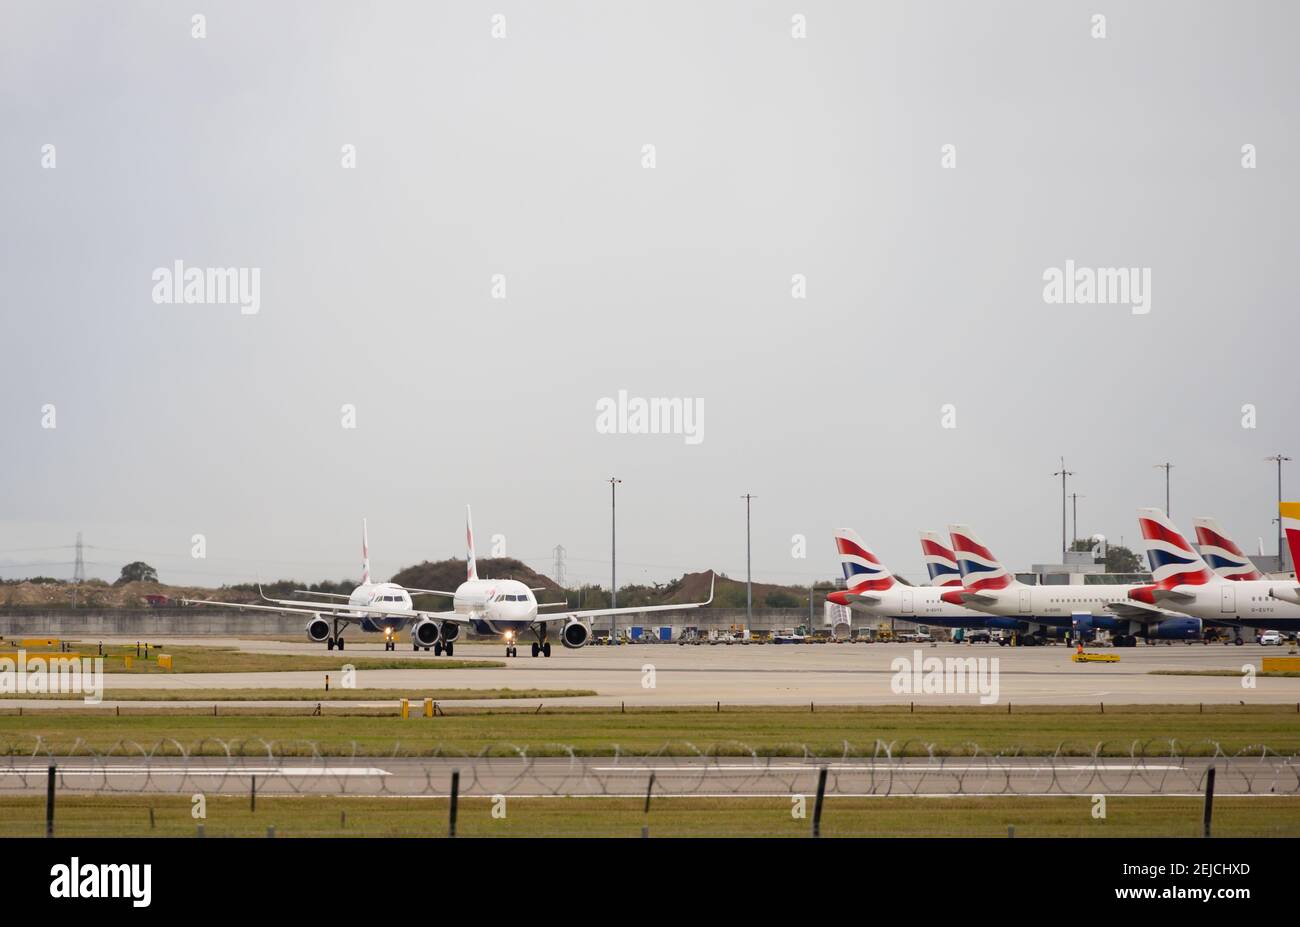 Two British Airways Airbus A320-232 taxi past others parked up. G-EUYY & G-EUYL. G-EUYY has Sharklet winglets fitted. London Heathrow Airport, London, Stock Photo